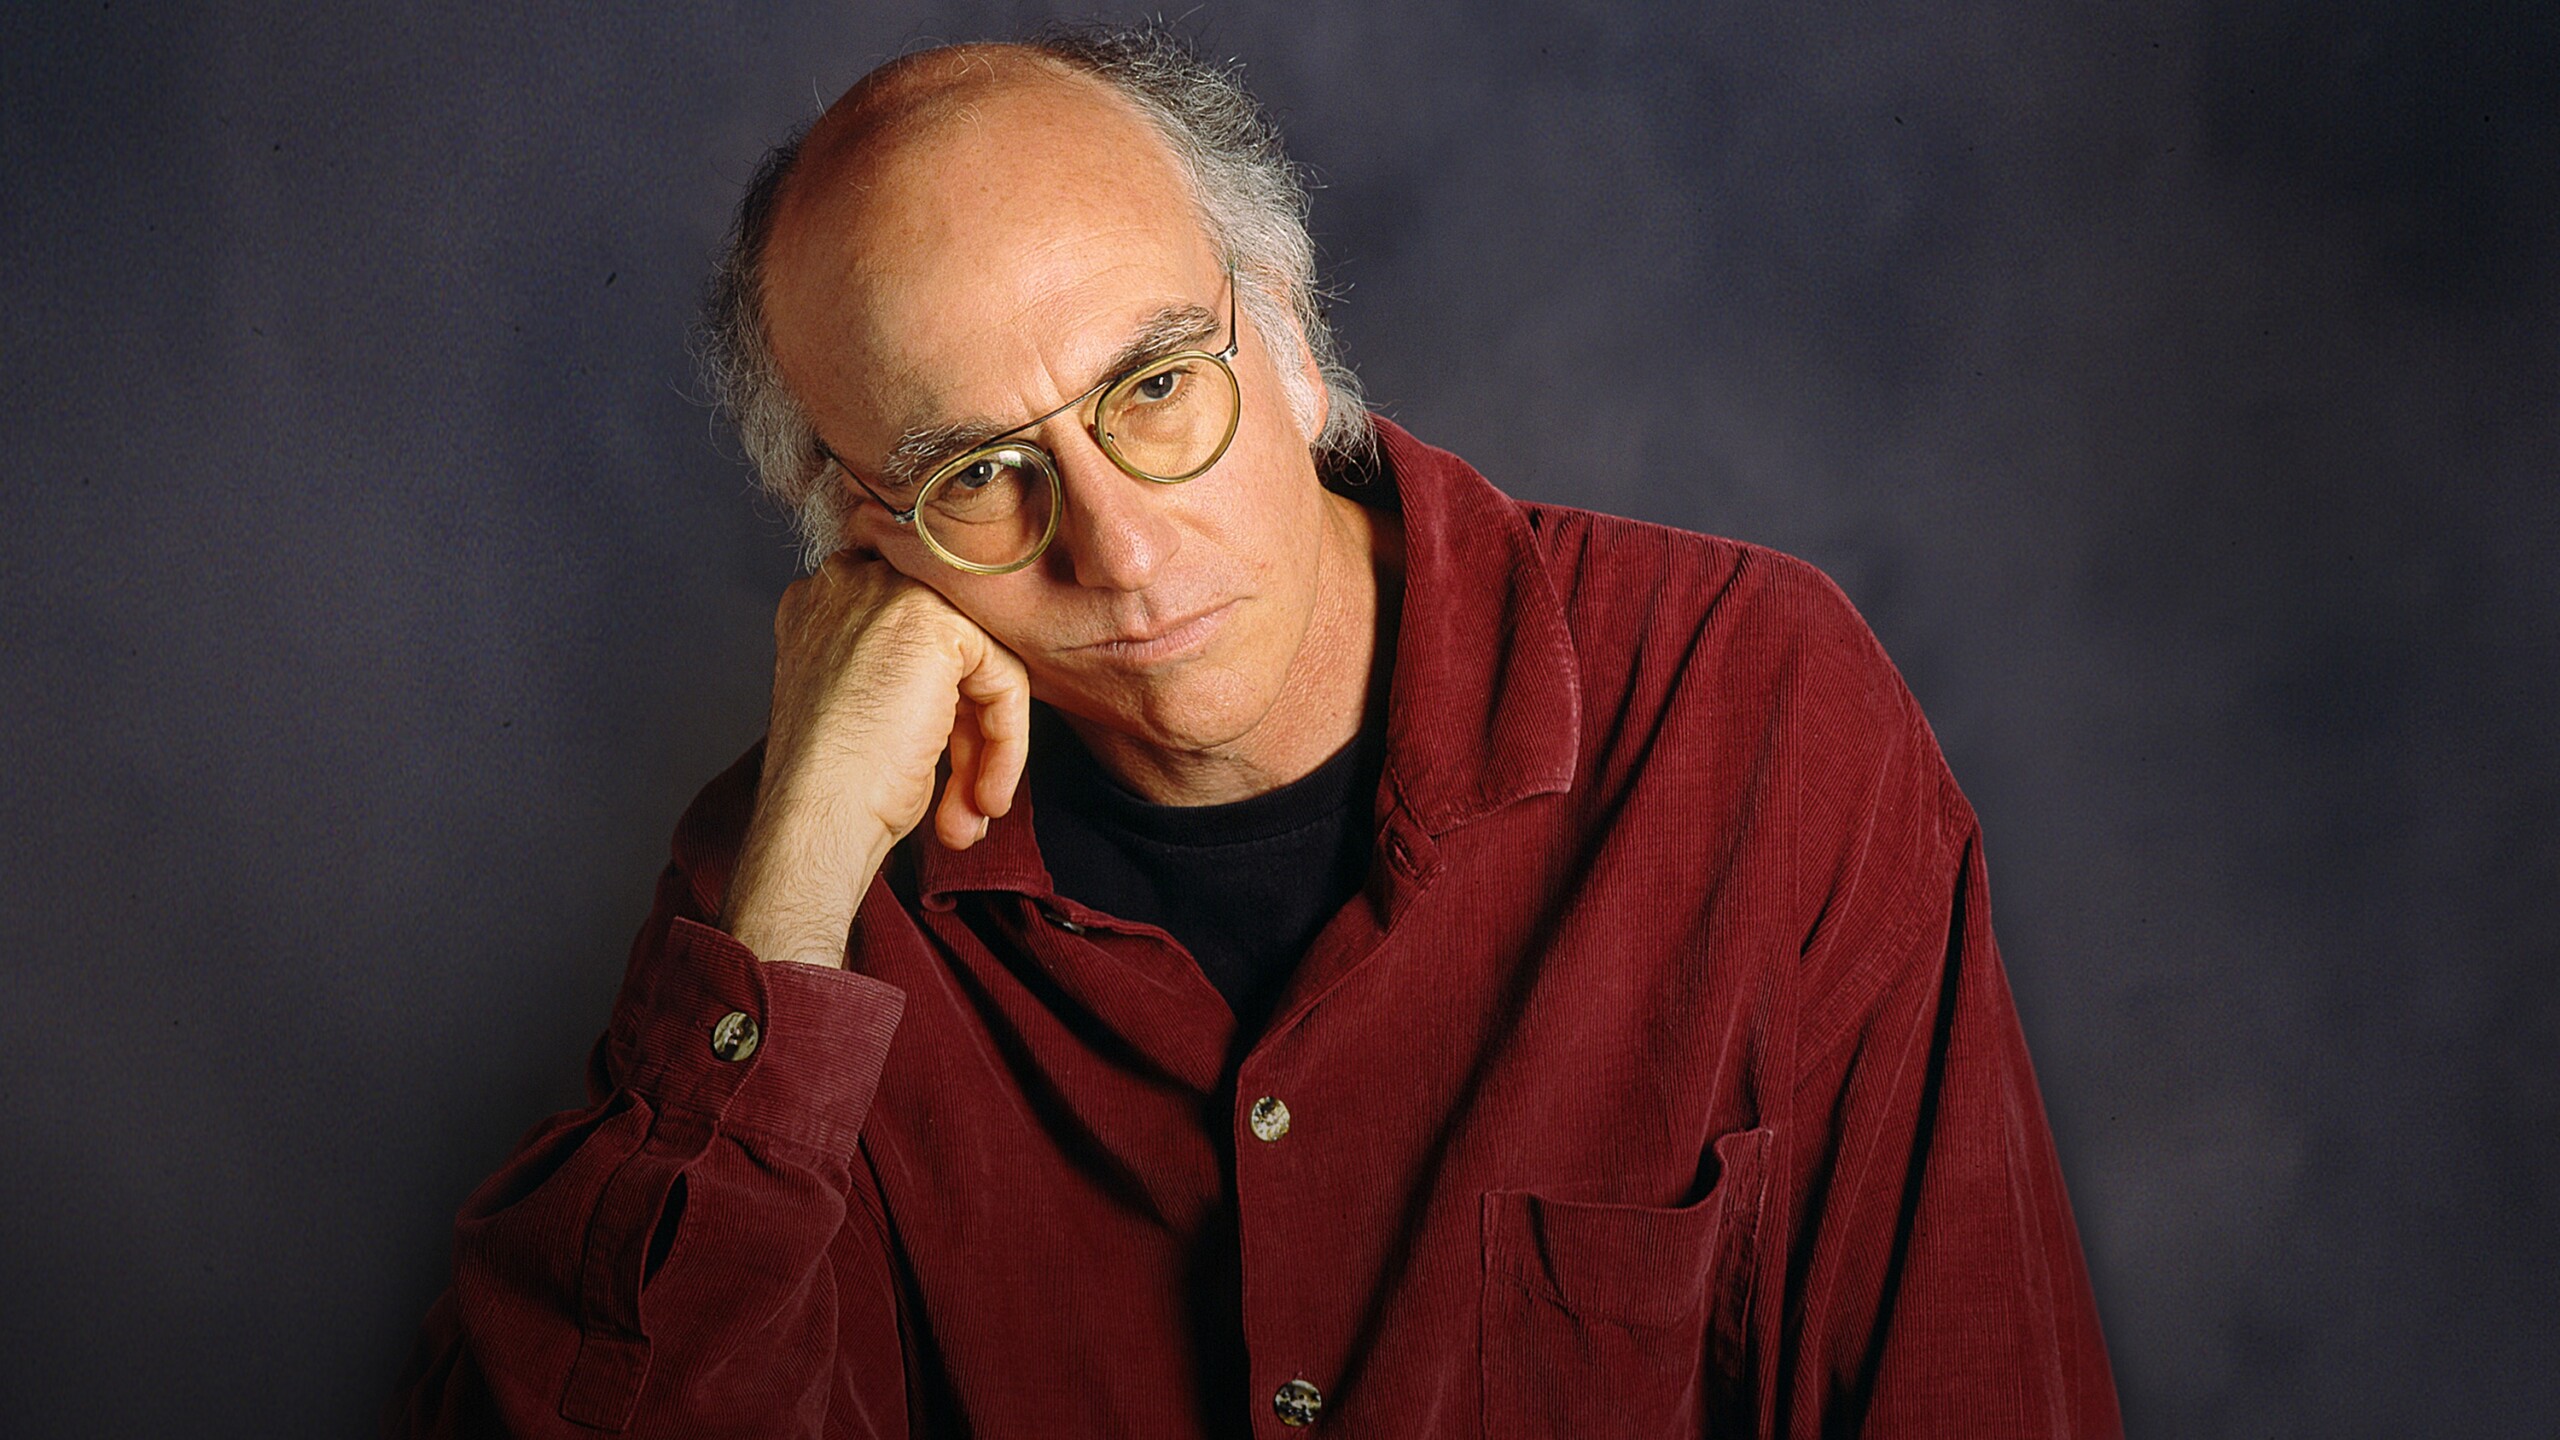 curb your enthusiasm season 7 download torrent